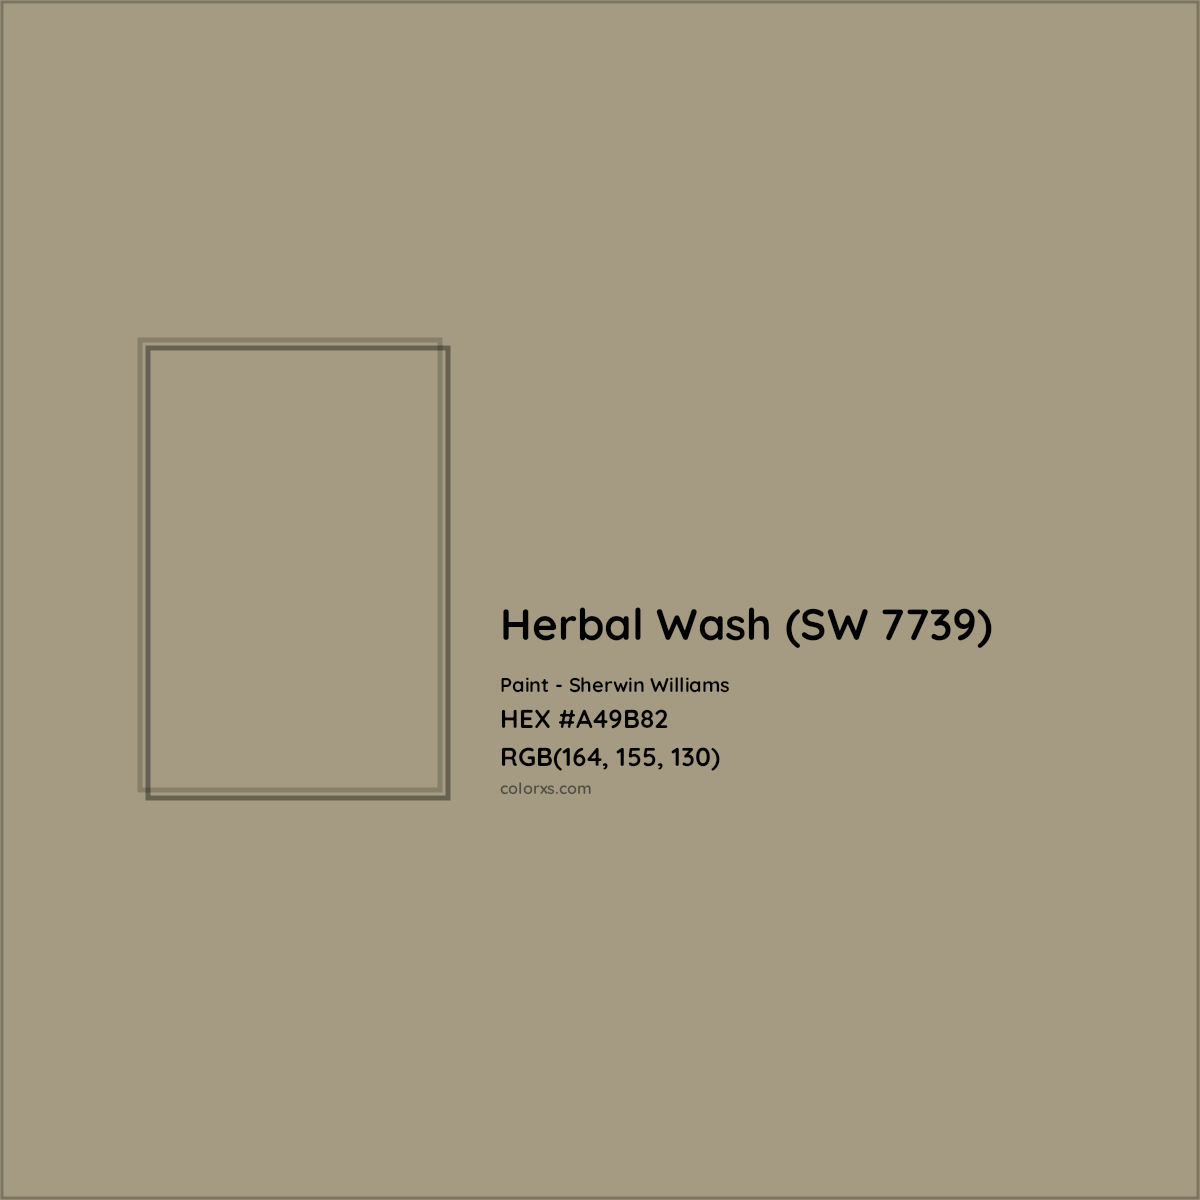 HEX #A49B82 Herbal Wash (SW 7739) Paint Sherwin Williams - Color Code